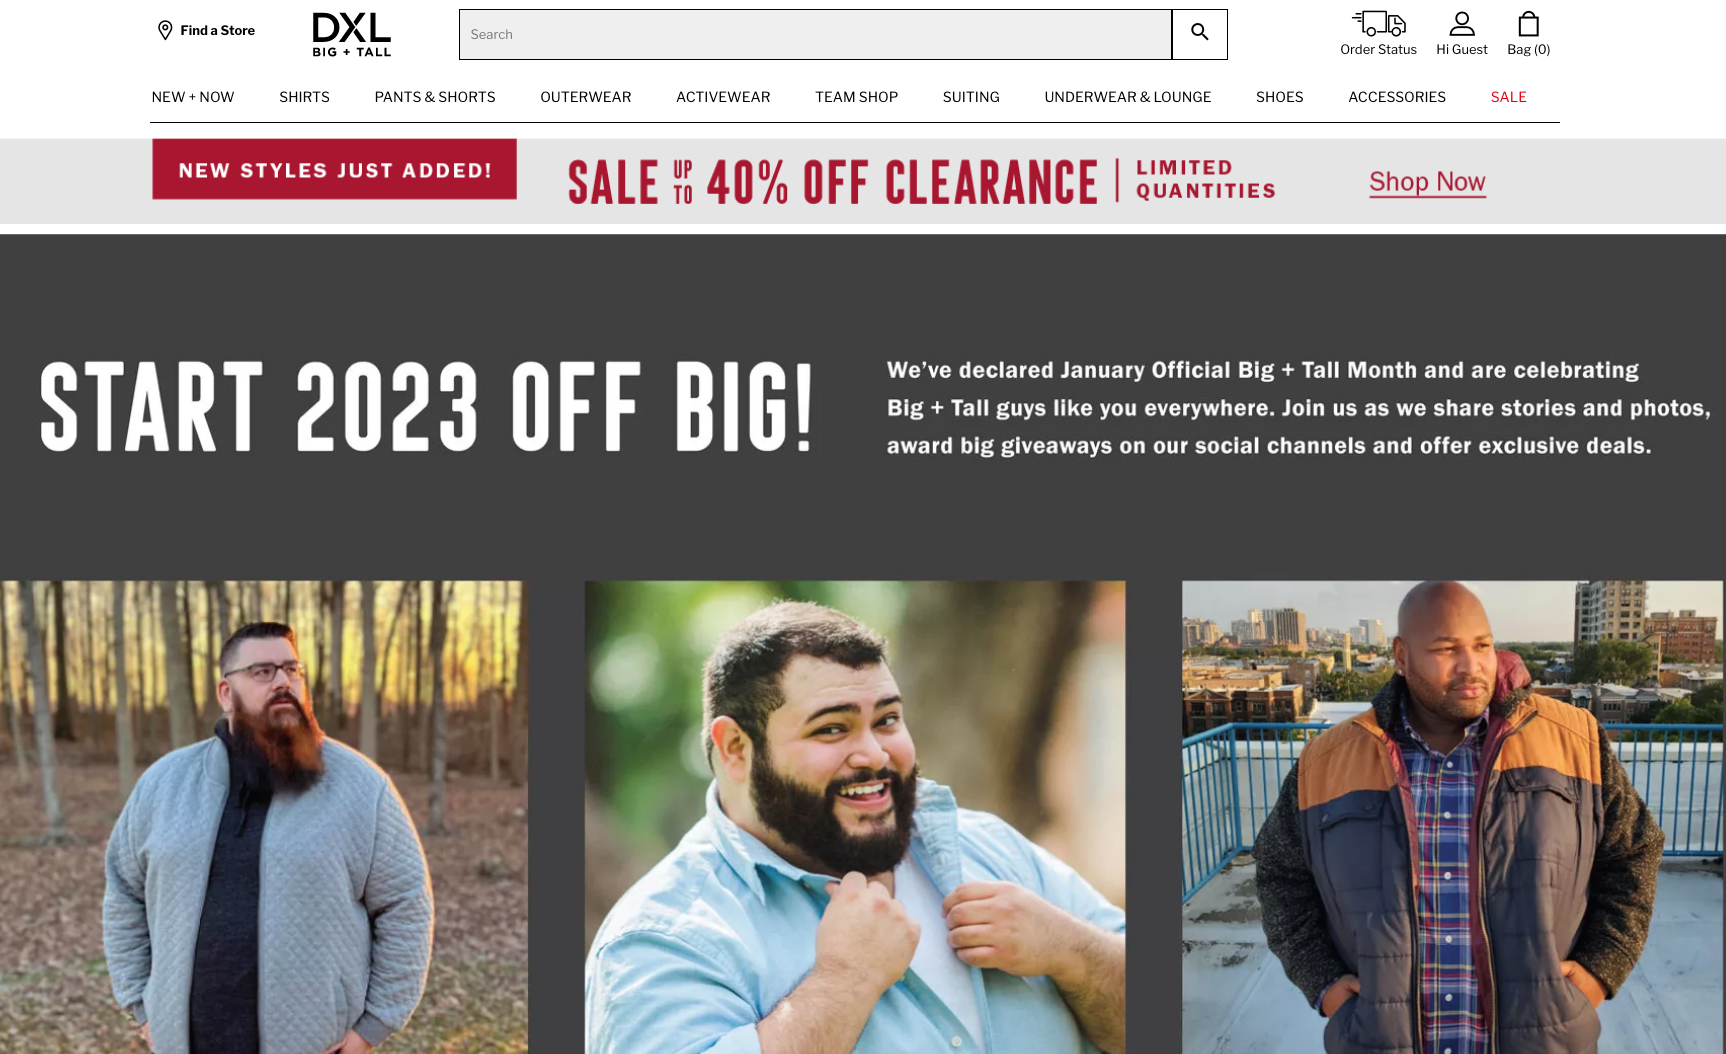 Plus size mens clothing • Compare & see prices now »